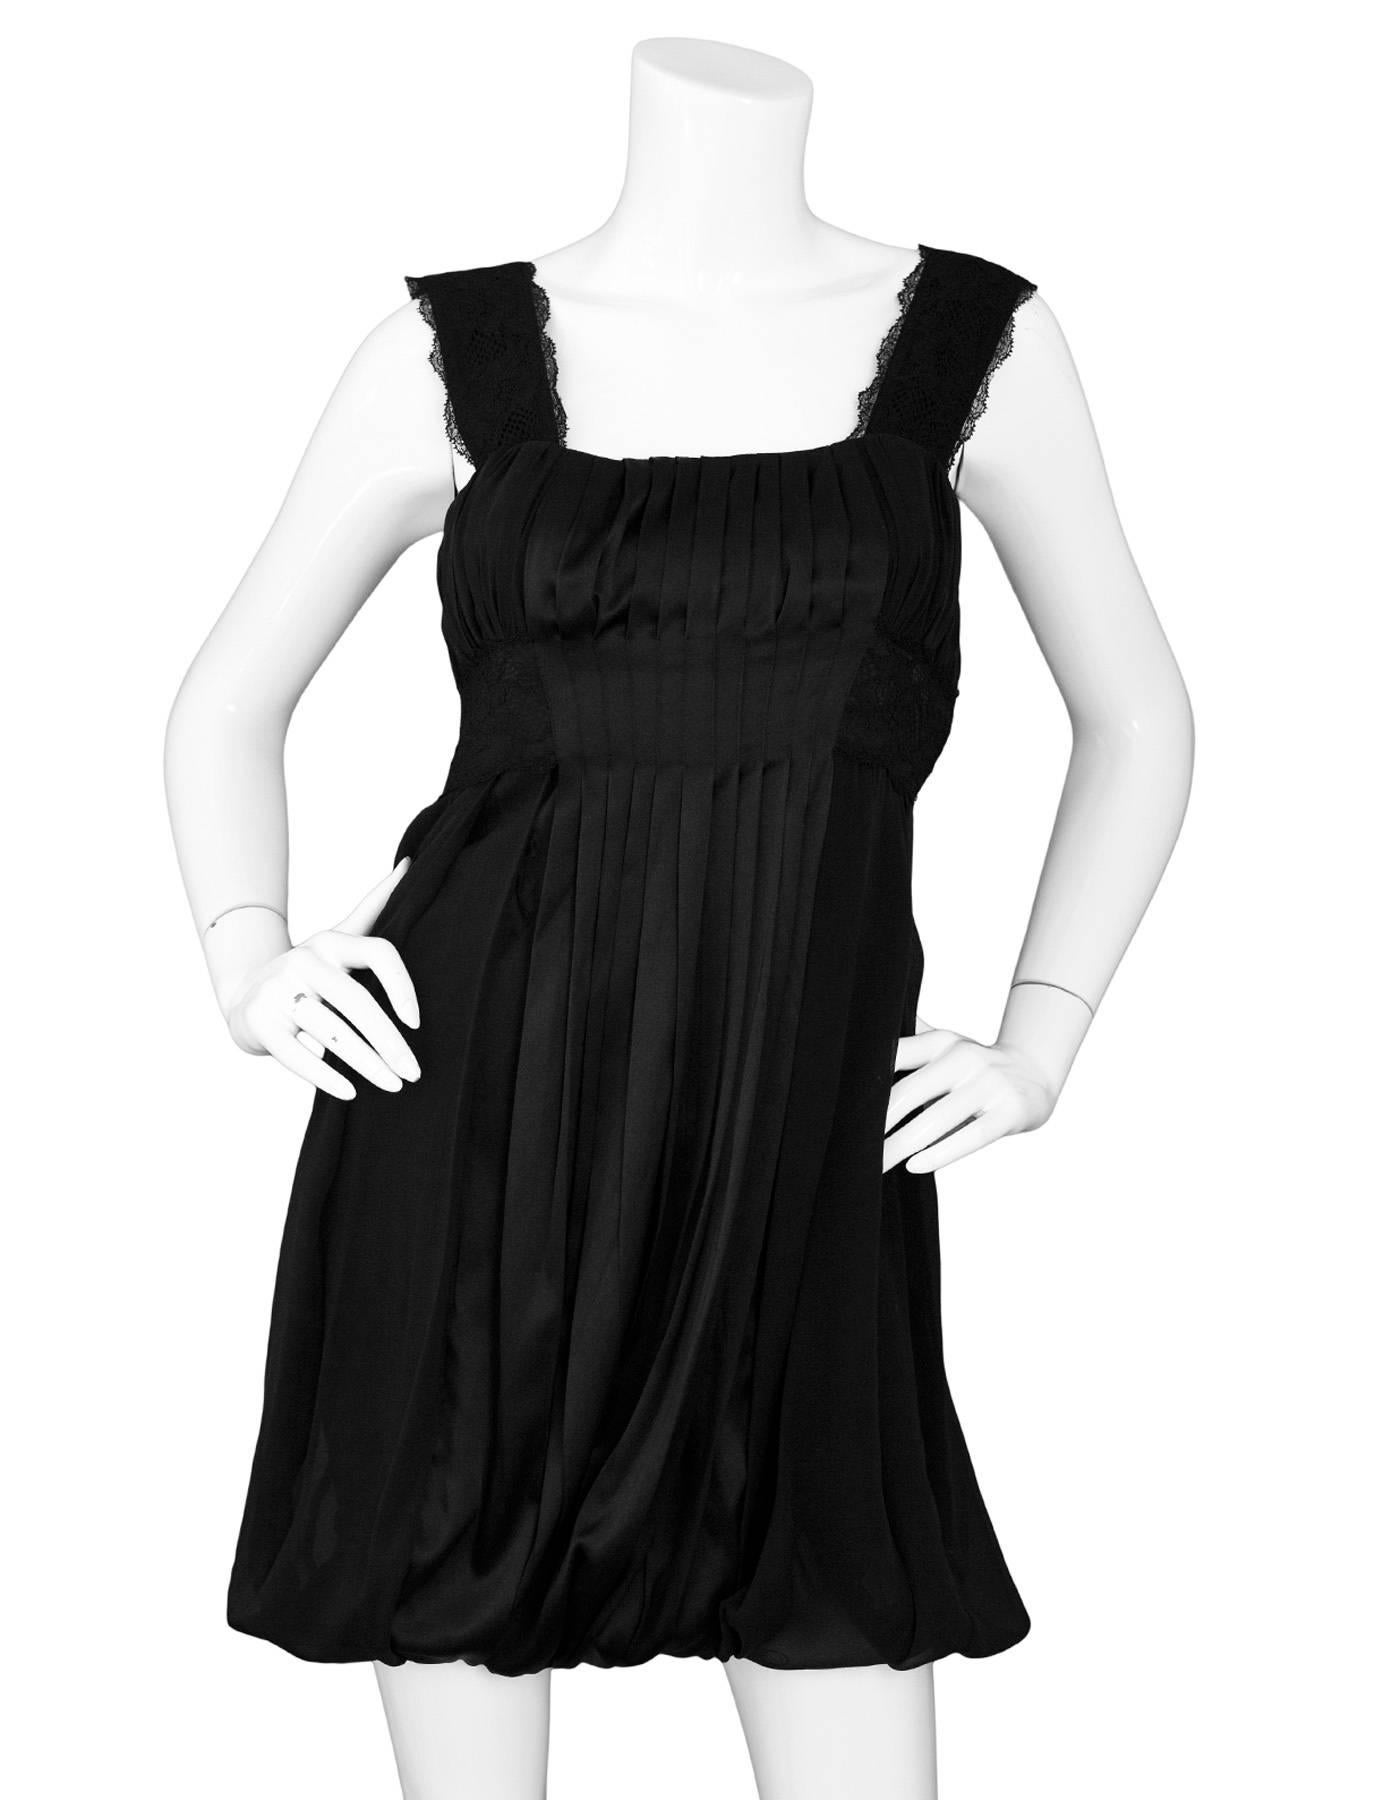 Diane von Furstenberg Black Silk Pleated Dress Sz 4

Features lace trim and bubble hem

Made In: China
Color: Black
Composition: 100% Silk
Lining: Side zip closure
Closure/Opening: Side zip closure - missing zipper pull
Overall Condition: Very good